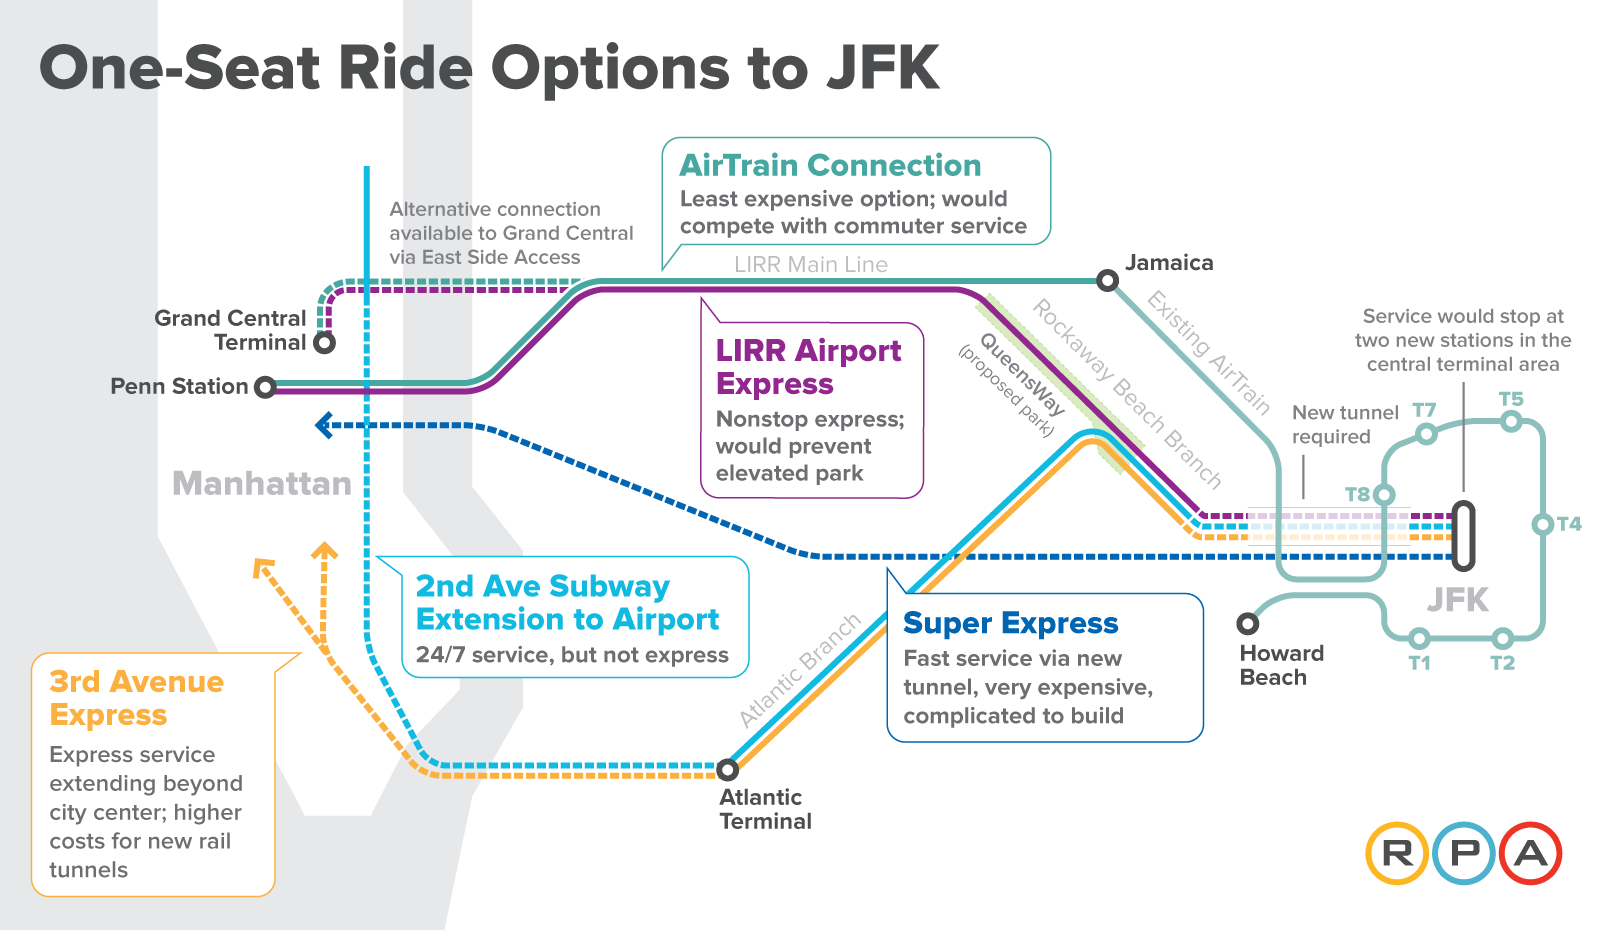 rpa-one-seat-ride-options-to-jfk